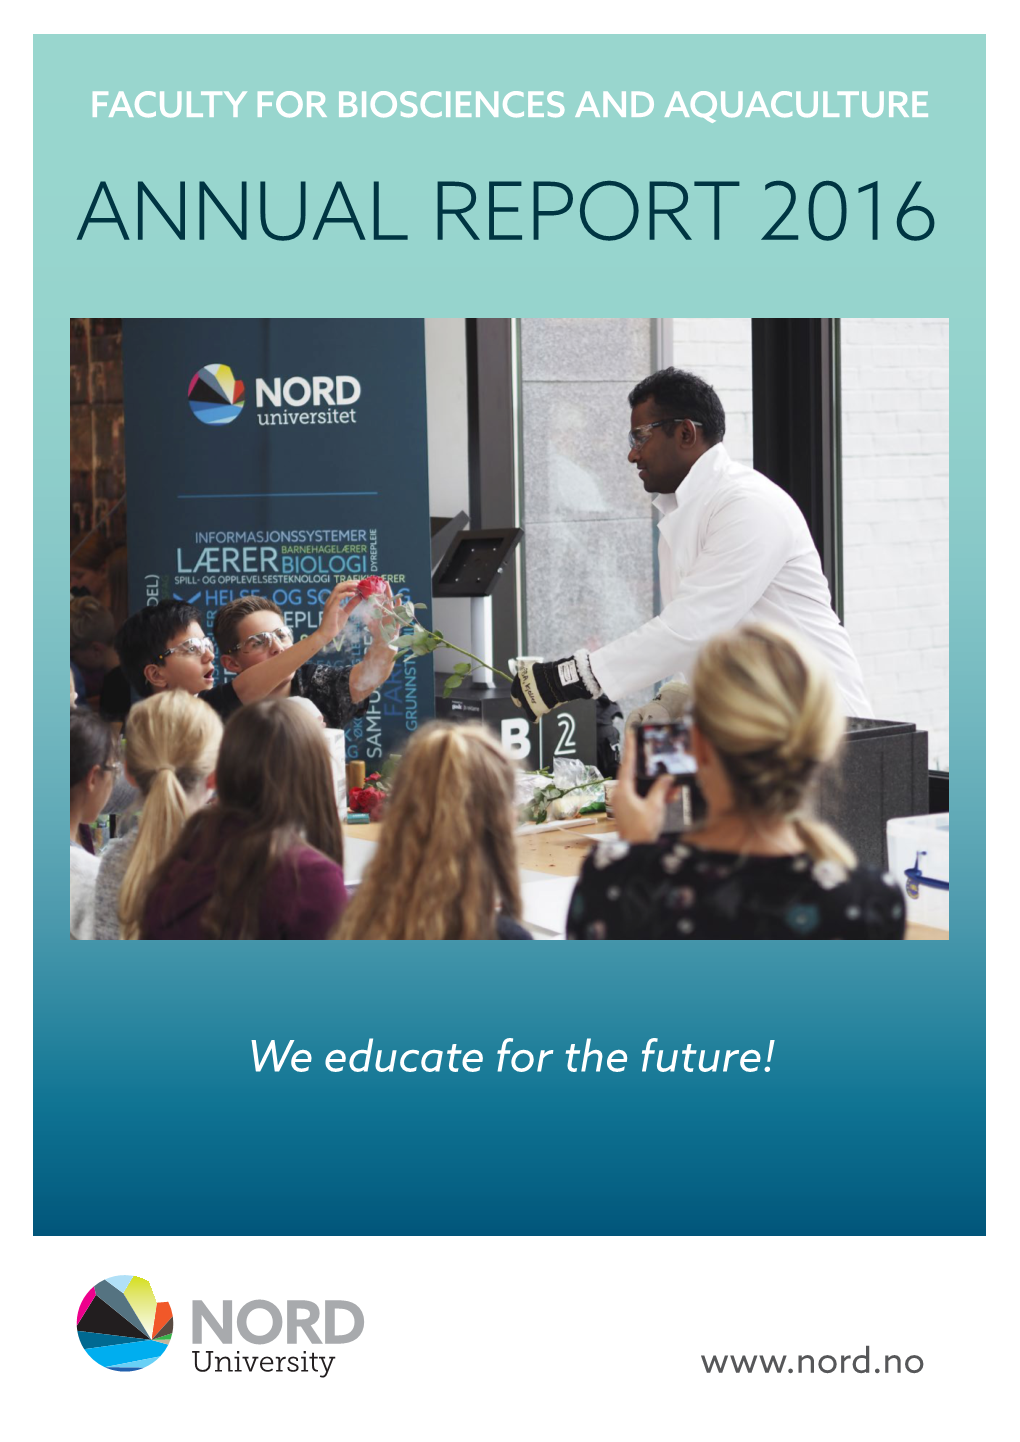 Faculty for Biosciences and Aquaculture Annual Report 2016